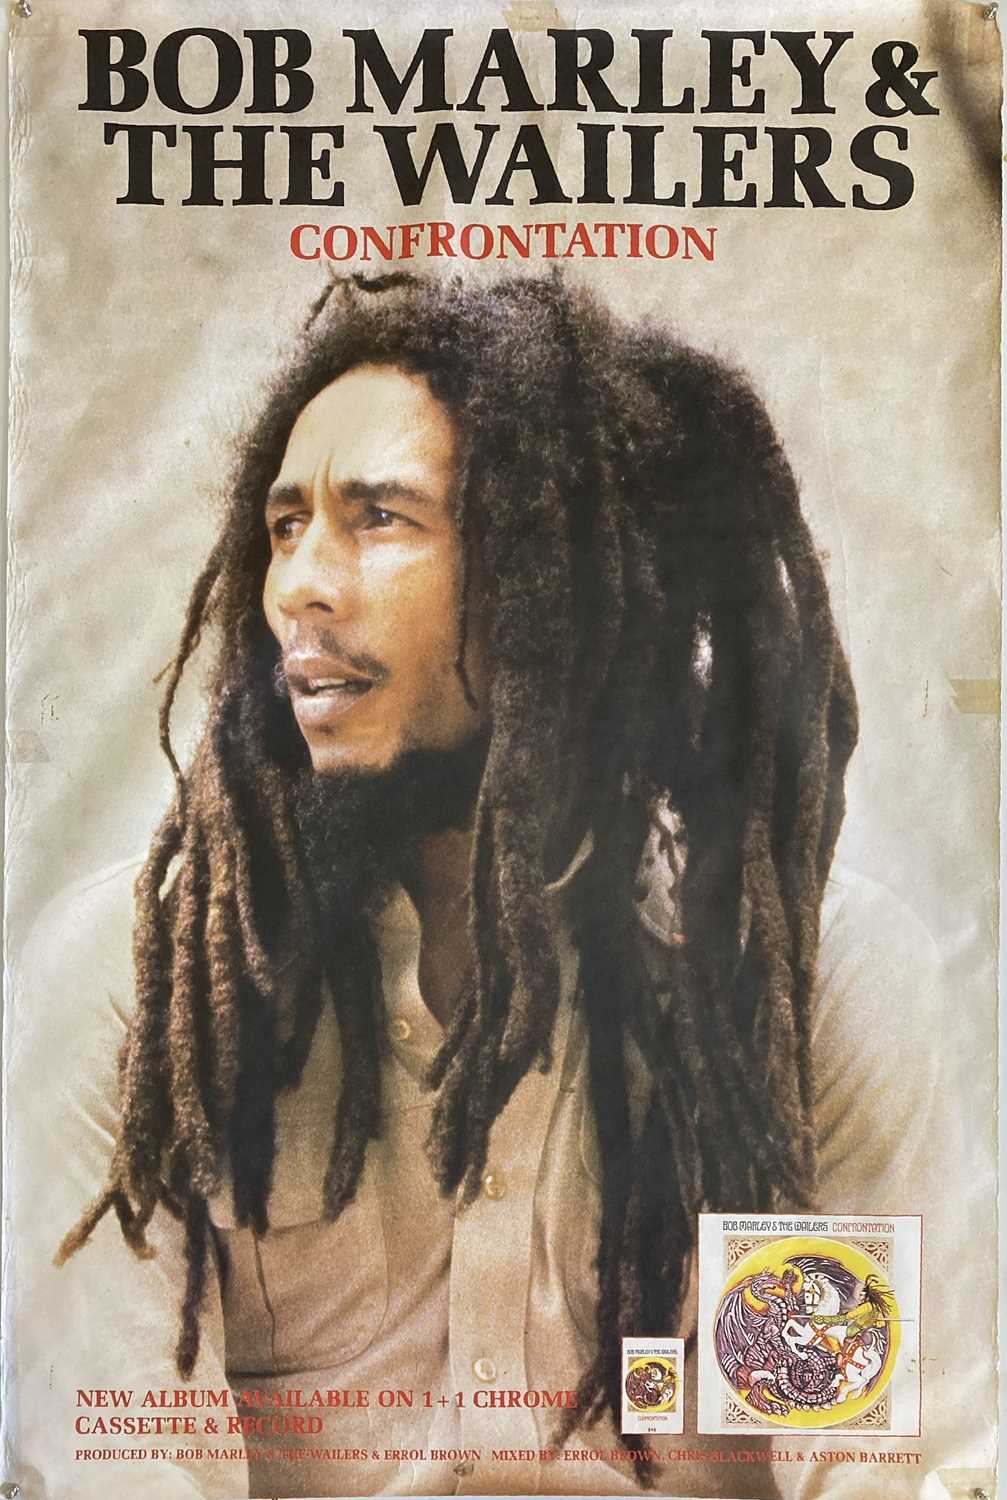 Lot 243 - BOB MARLEY AND THE WAILERS - CONFRONTATION POSTER.